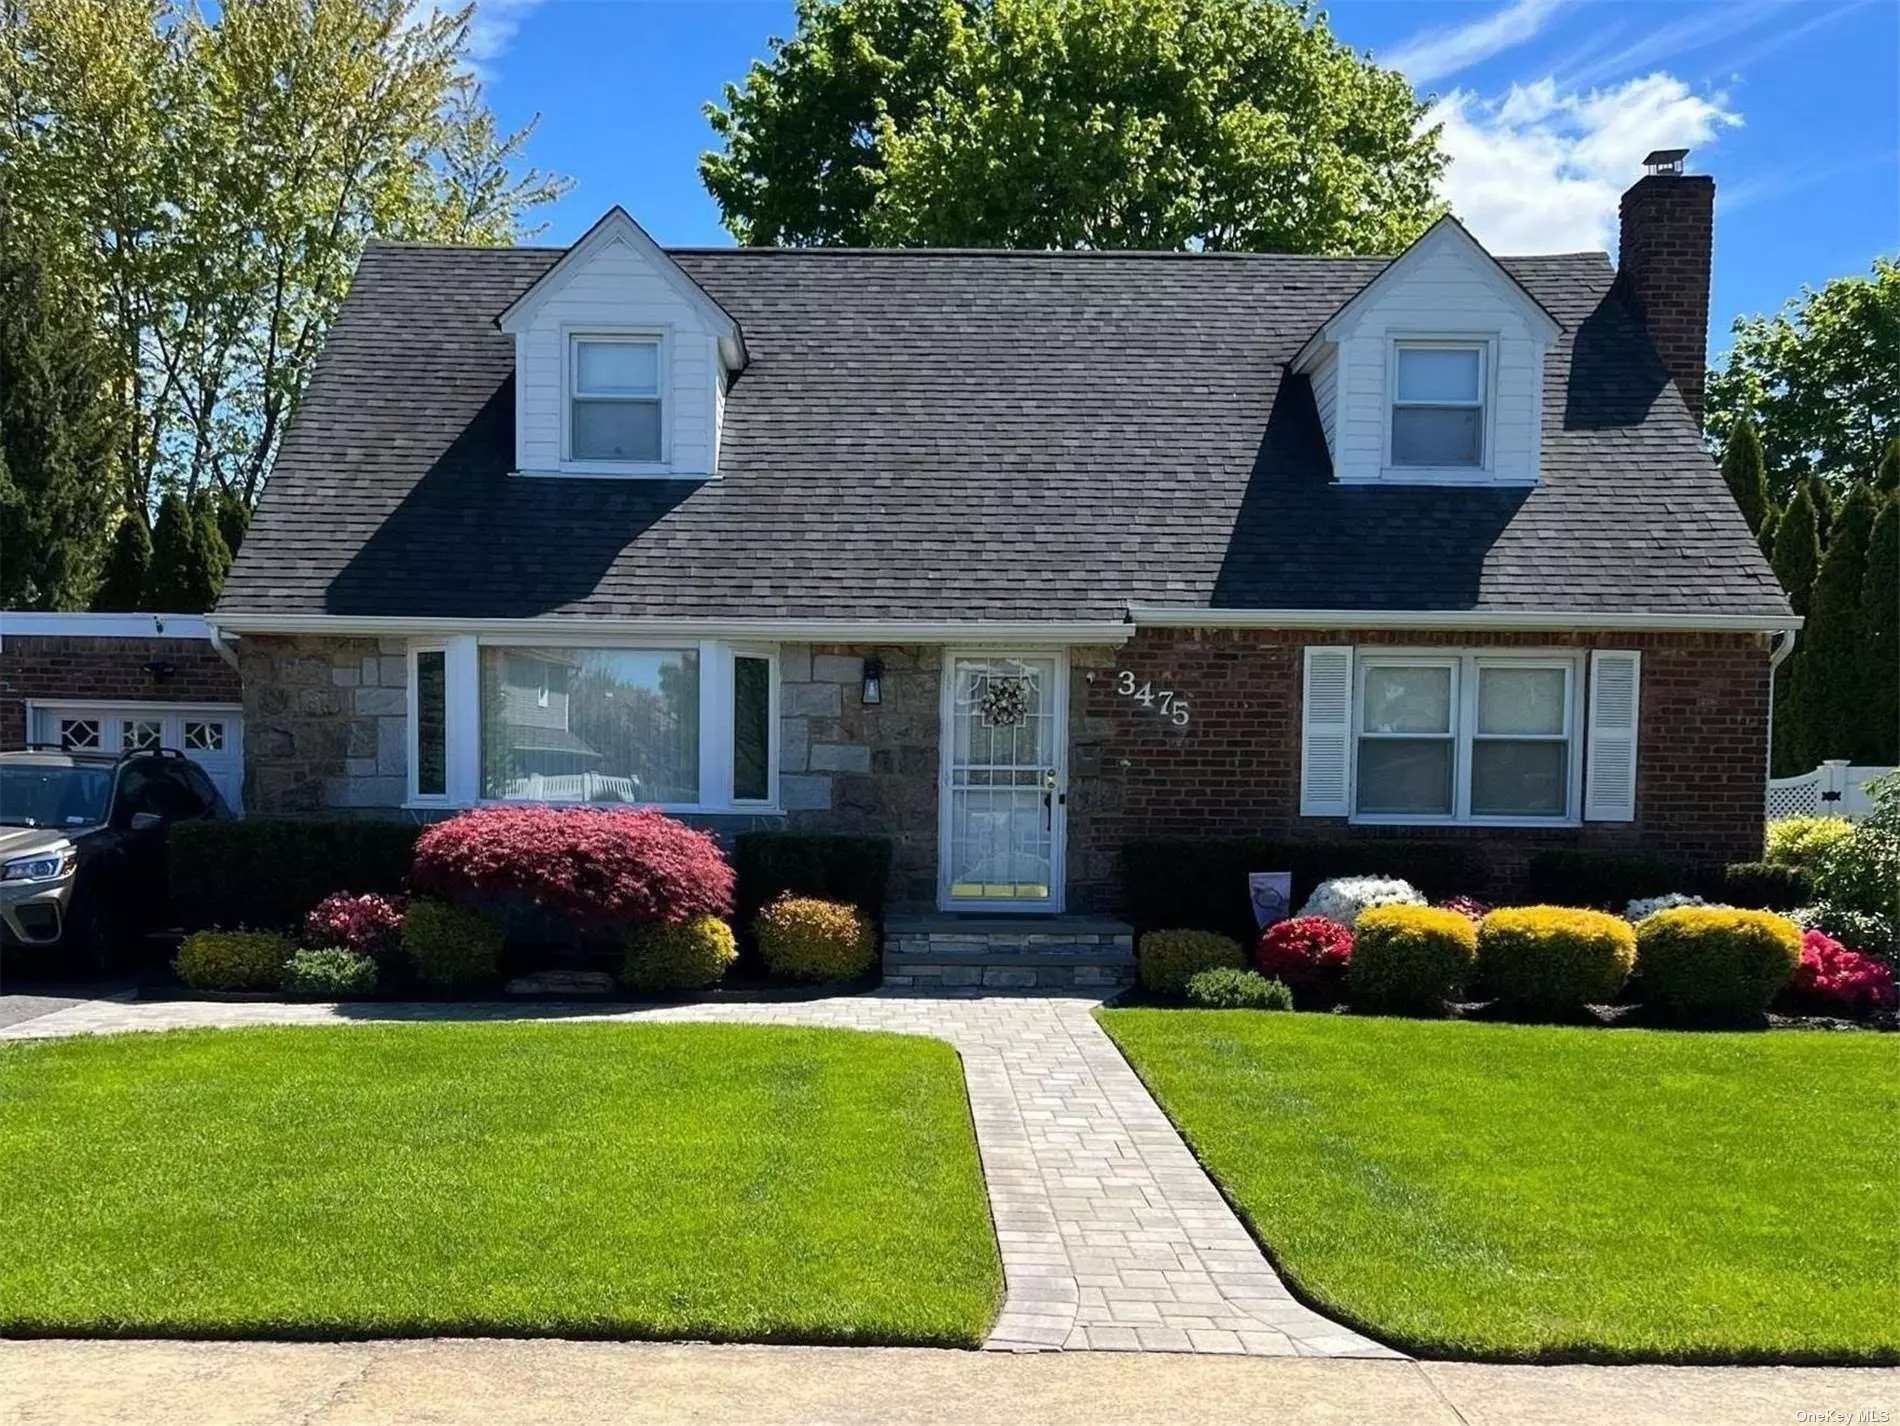 Welcome home to this spacious updated cape in the heart of Wantagh Woods. The beautifully manicured yard with inground sprinklers & deck make this a perfect spot to entertain. The updated kitchen features granite counter tops. The living room leads into the formal dining area. The den/family room with access to yard is the perfect spot to relax. King size primary bedroom plus 3 additional large bedrooms. Updated bathrooms include a jacuzzi tub. Full finished basement, hardwood floors, new boiler and hot water heater, new garage door, alarm system. Close to Train for easy commute to NYC. Located in the Wantagh school district 2 blocks from Wantagh elementary school. Low Taxes !!